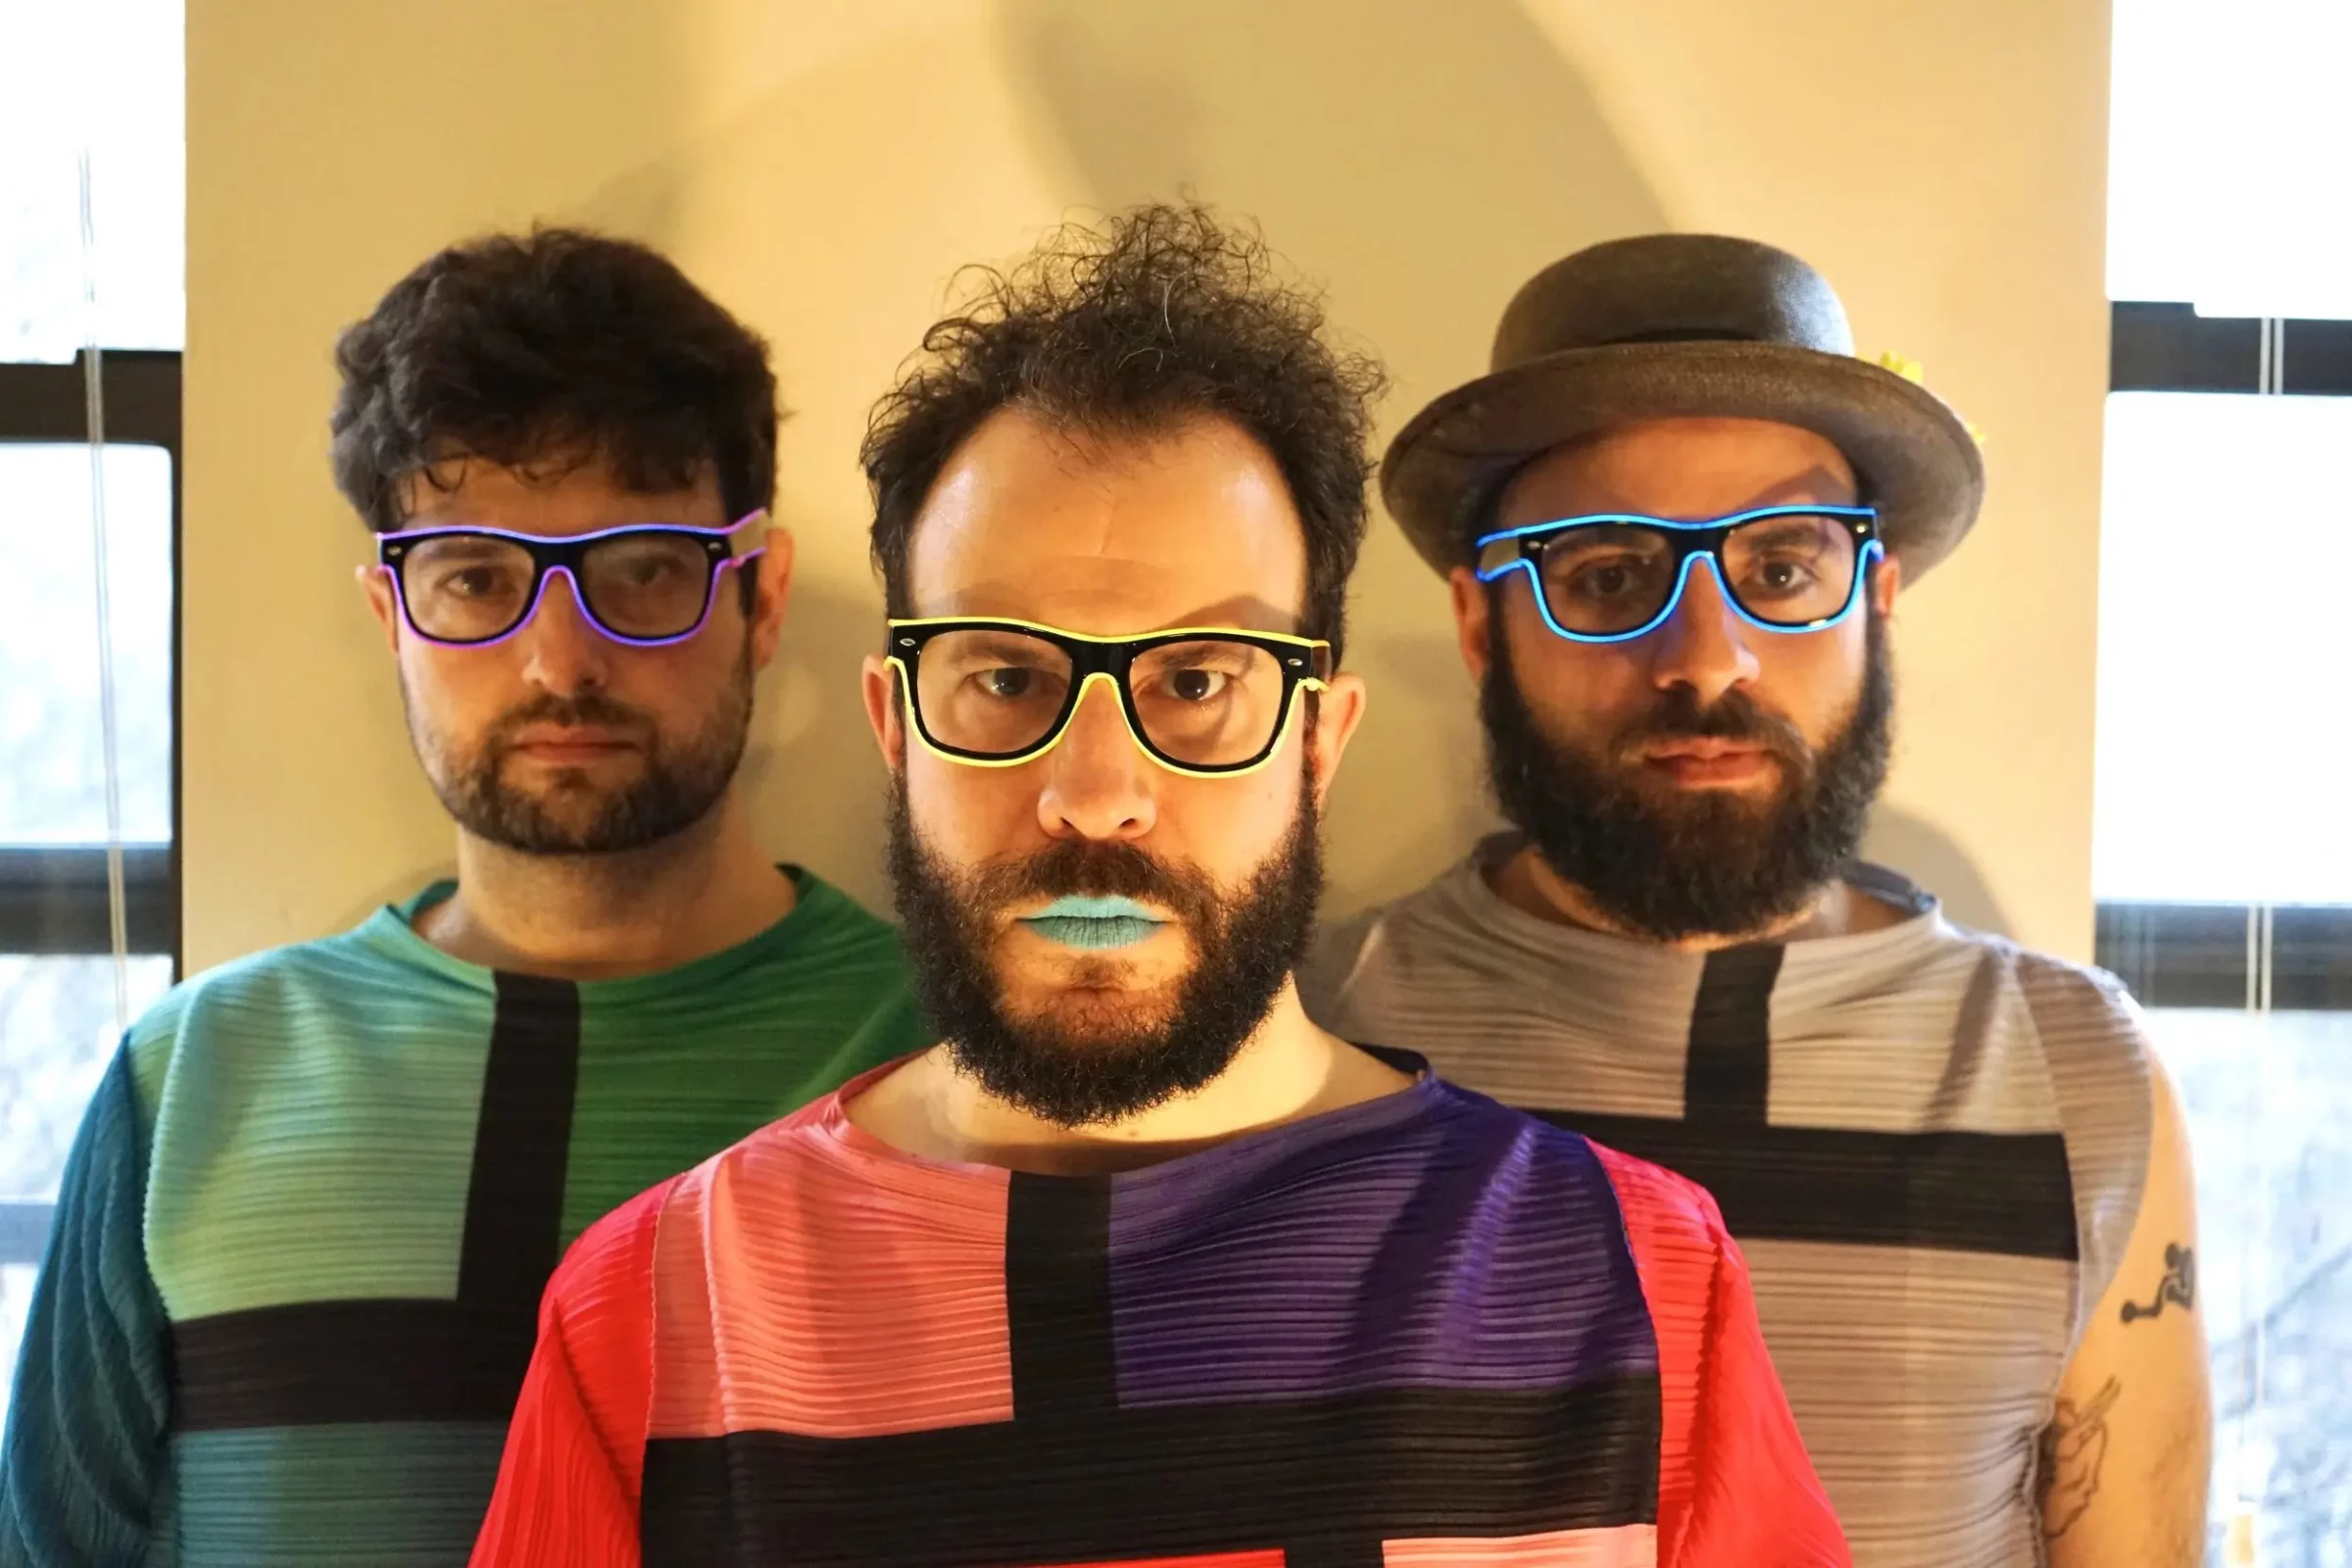 Three male members of the band Pinc Louds stand in a row, wearing colorful geometric-patterned shirts and neon glasses, with the lead singer sporting blue lipstick, against a plain background.